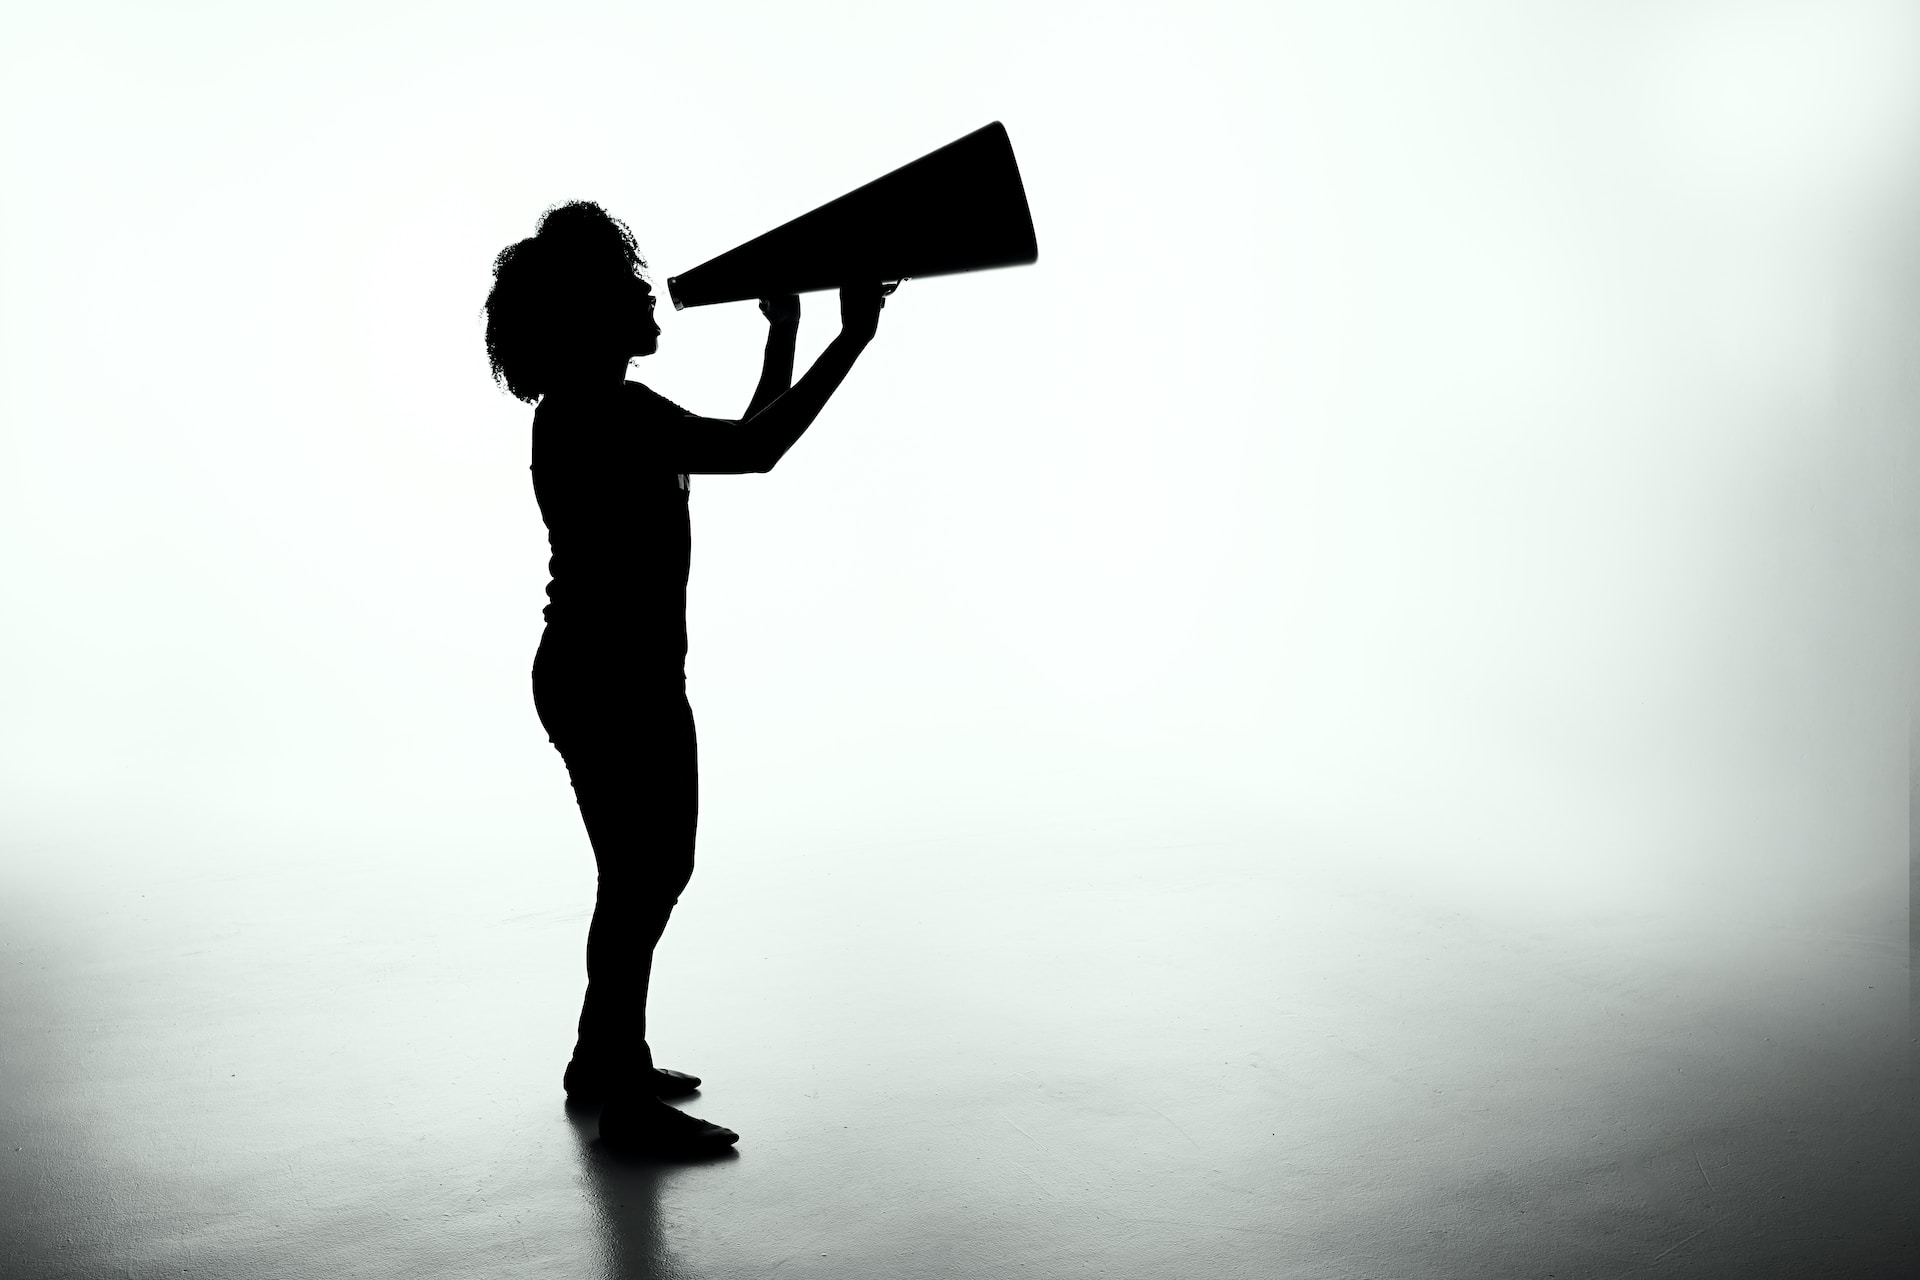 Silhouette of woman shouting into megaphone. Photo by Patrick Fore on Unsplash